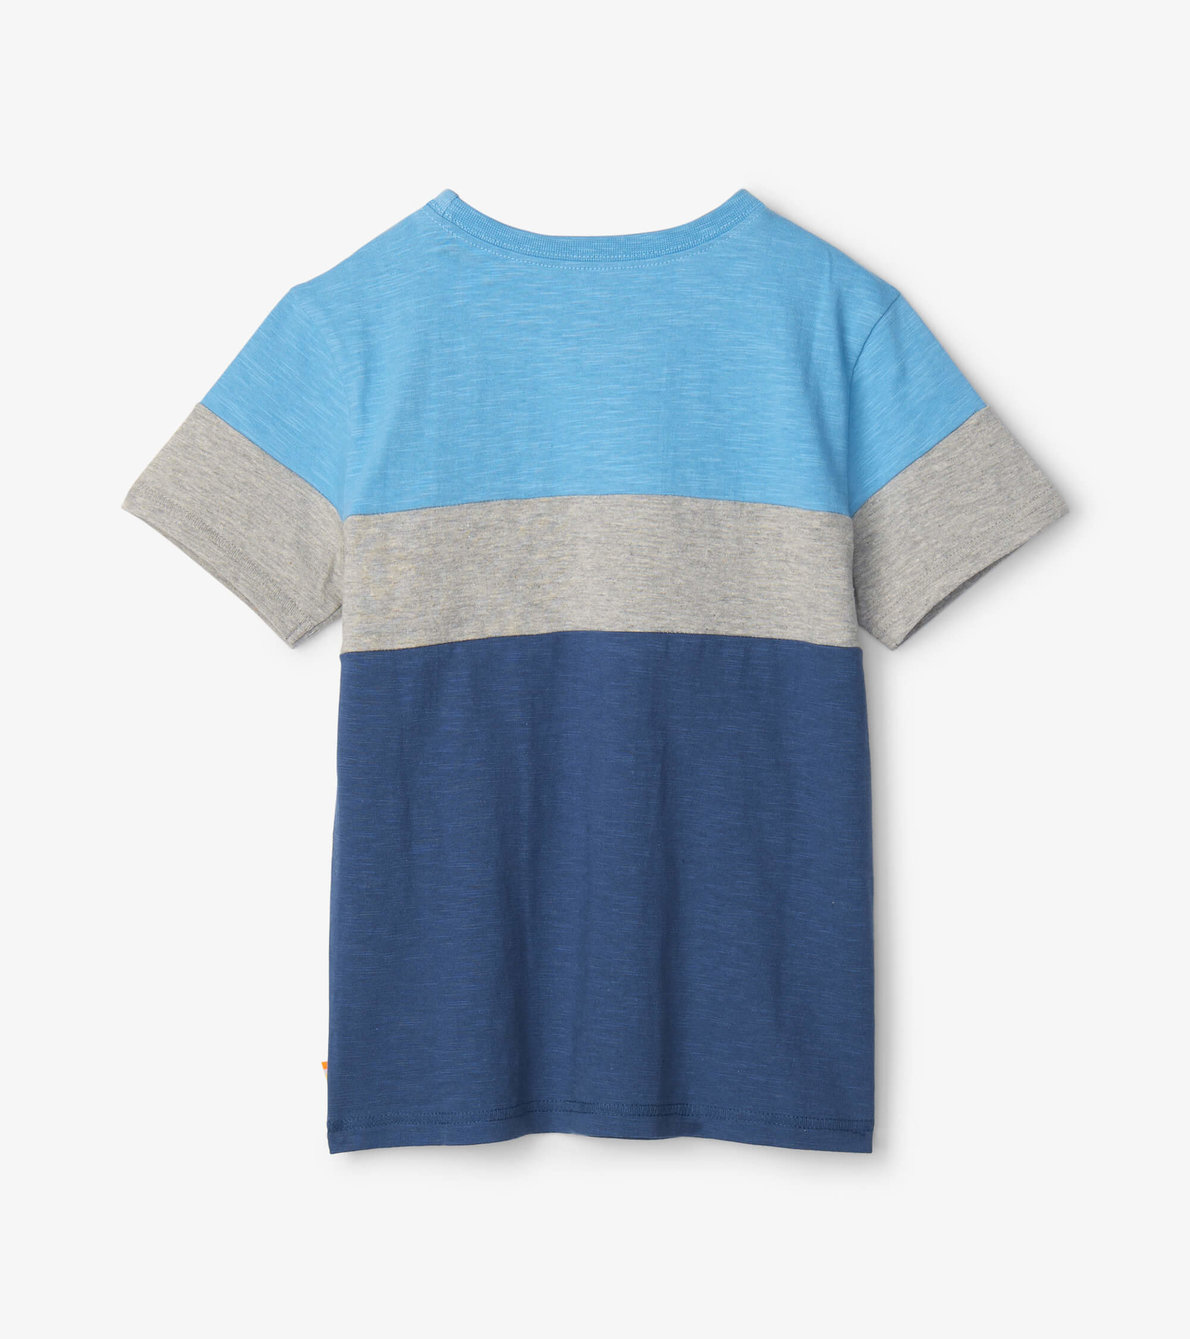 View larger image of Blue Panel Pocket Tee